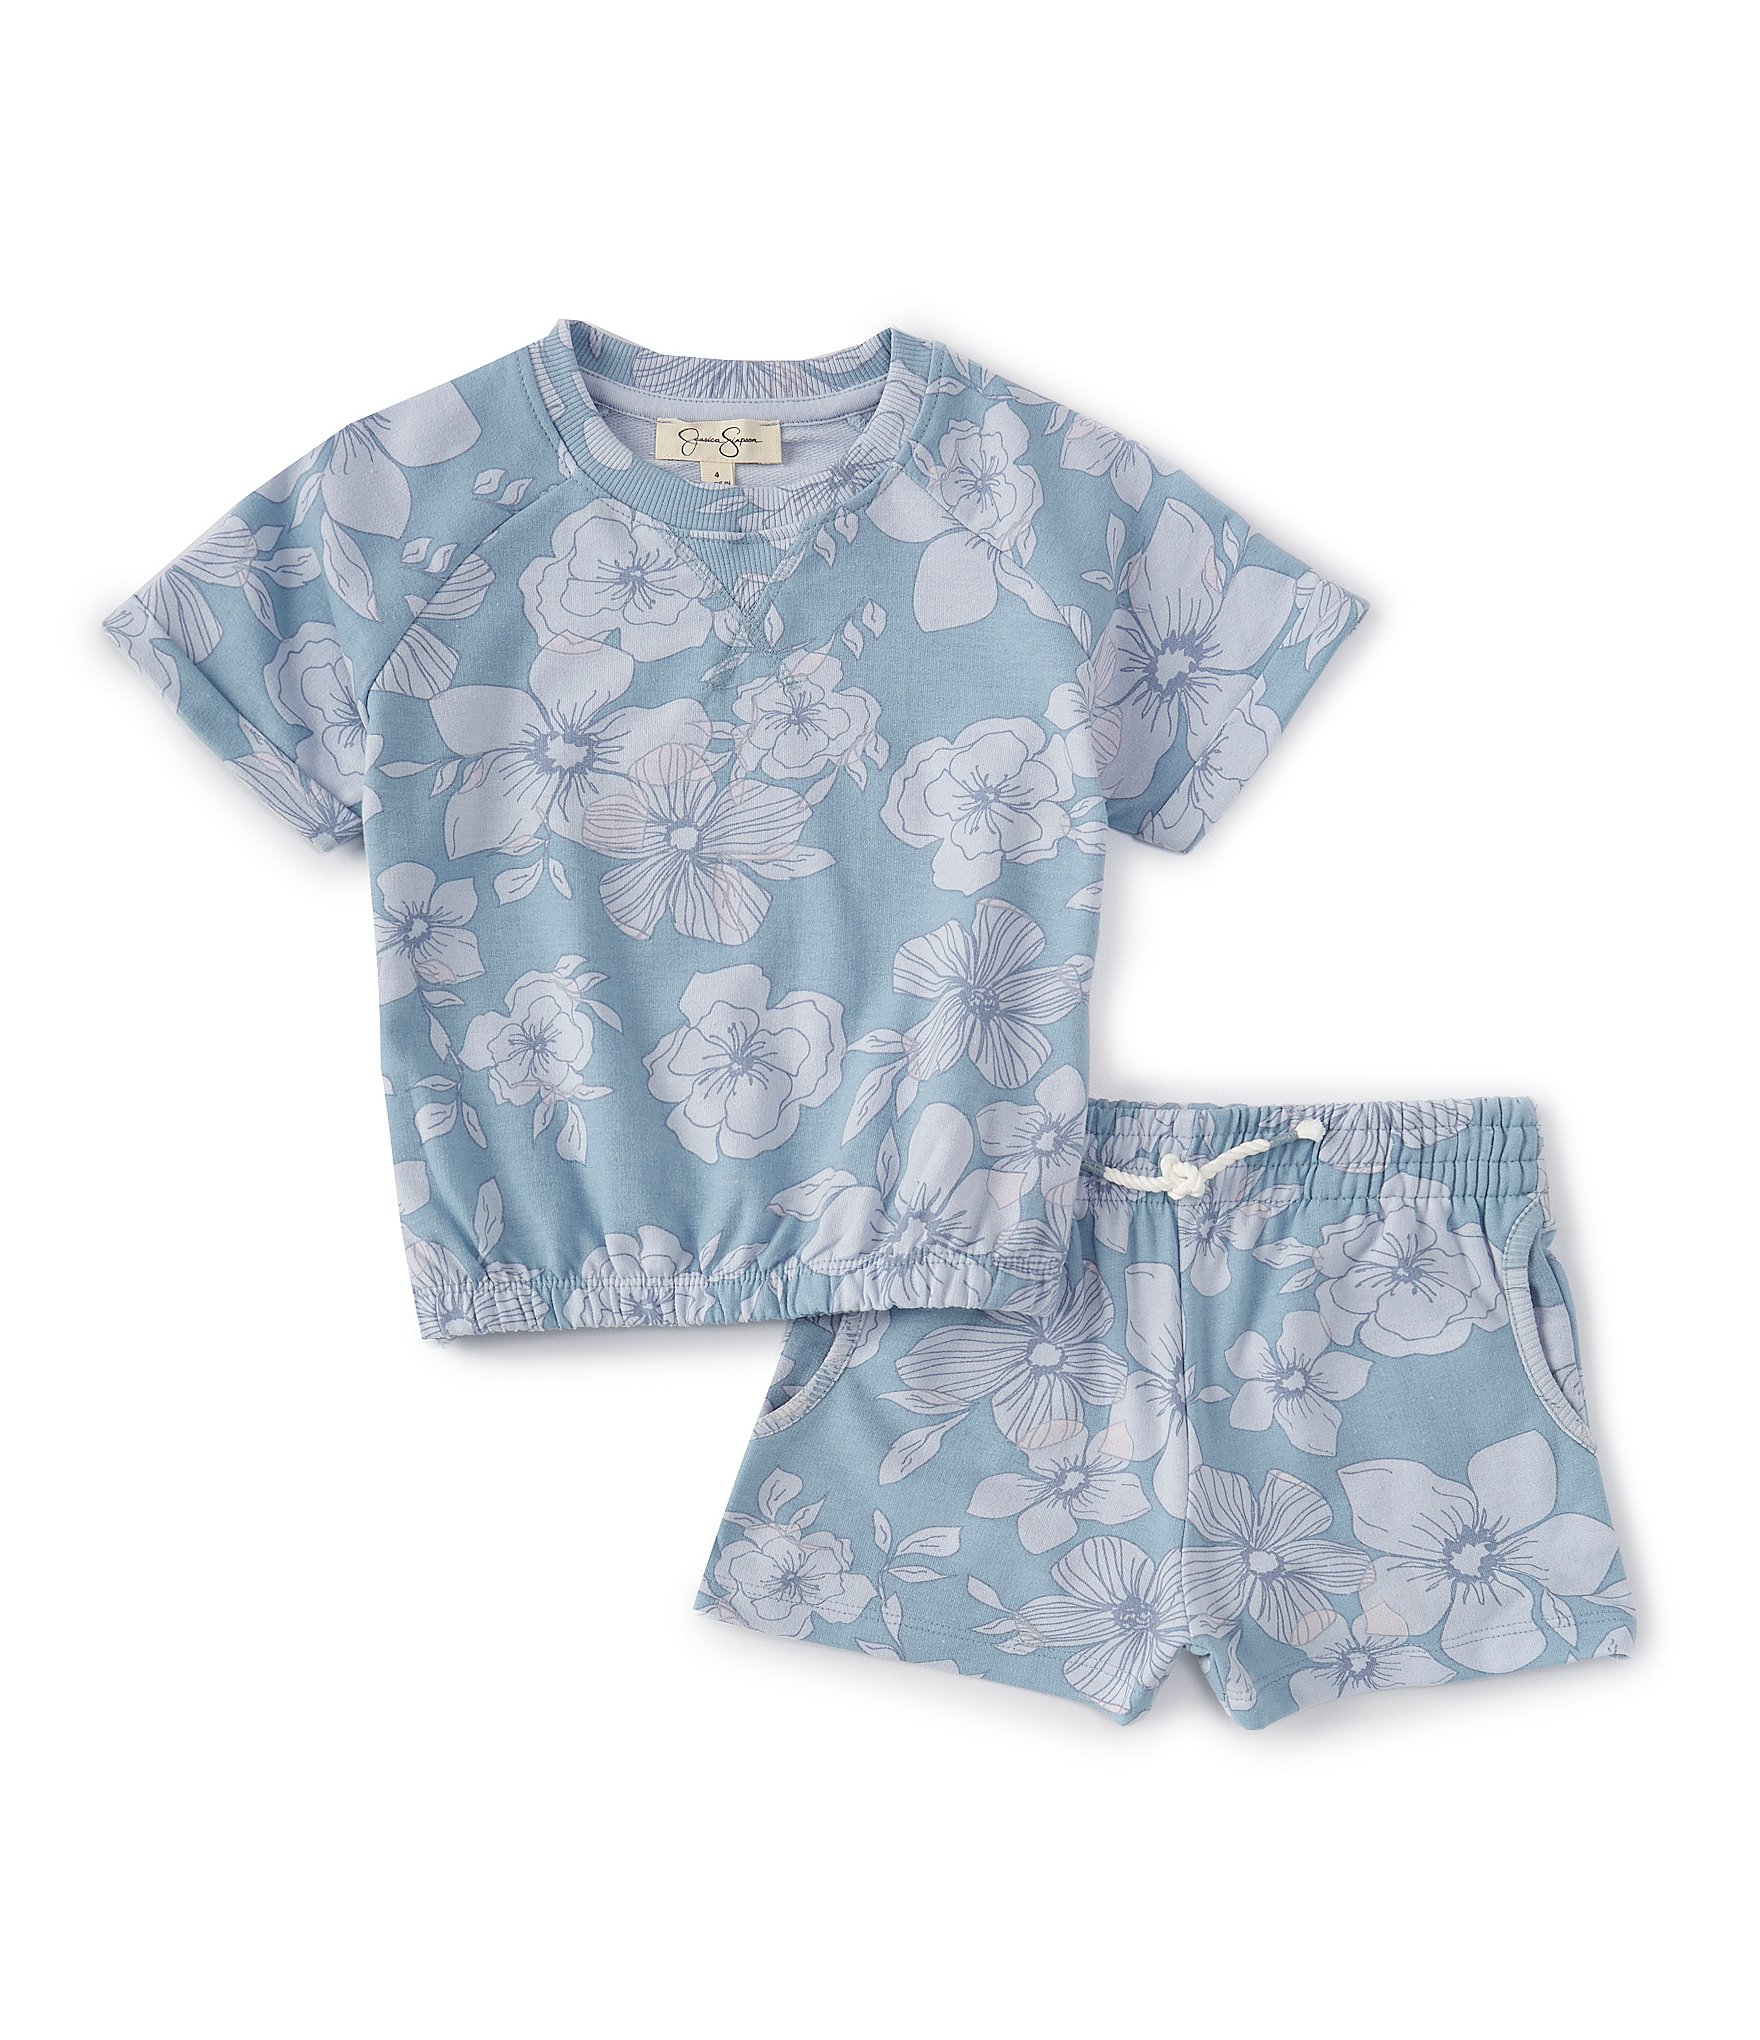 Jessica Simpson LittleBig Girls 4-8 Short Sleeve Checked Floral Print French Terry Tee Shorts Matching Set - 4